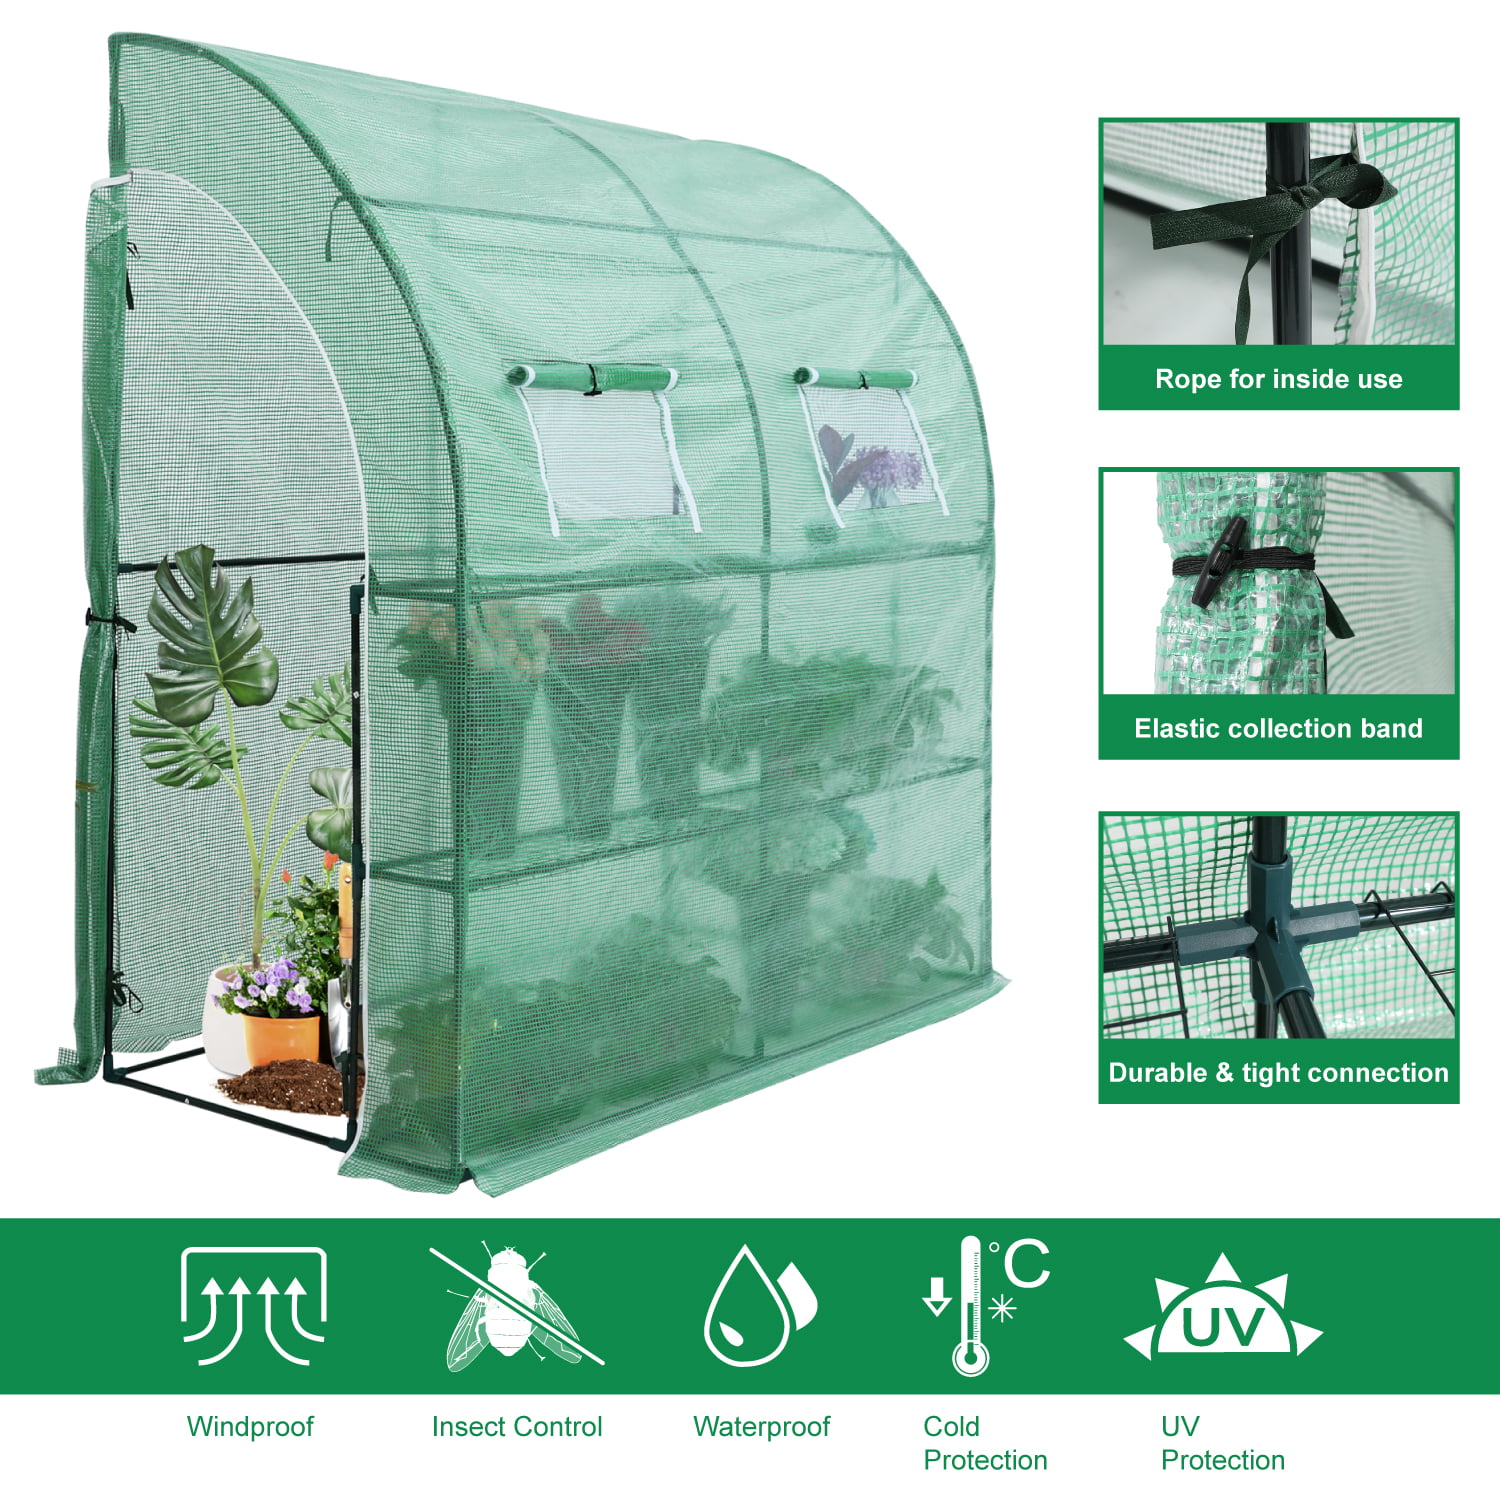 ABCCANOPY Lean-to Walk-in Greenhouse, Portable Gardening Greenhouse for  Indoor Outdoor with Tier Shelves (Green PE Cover) …